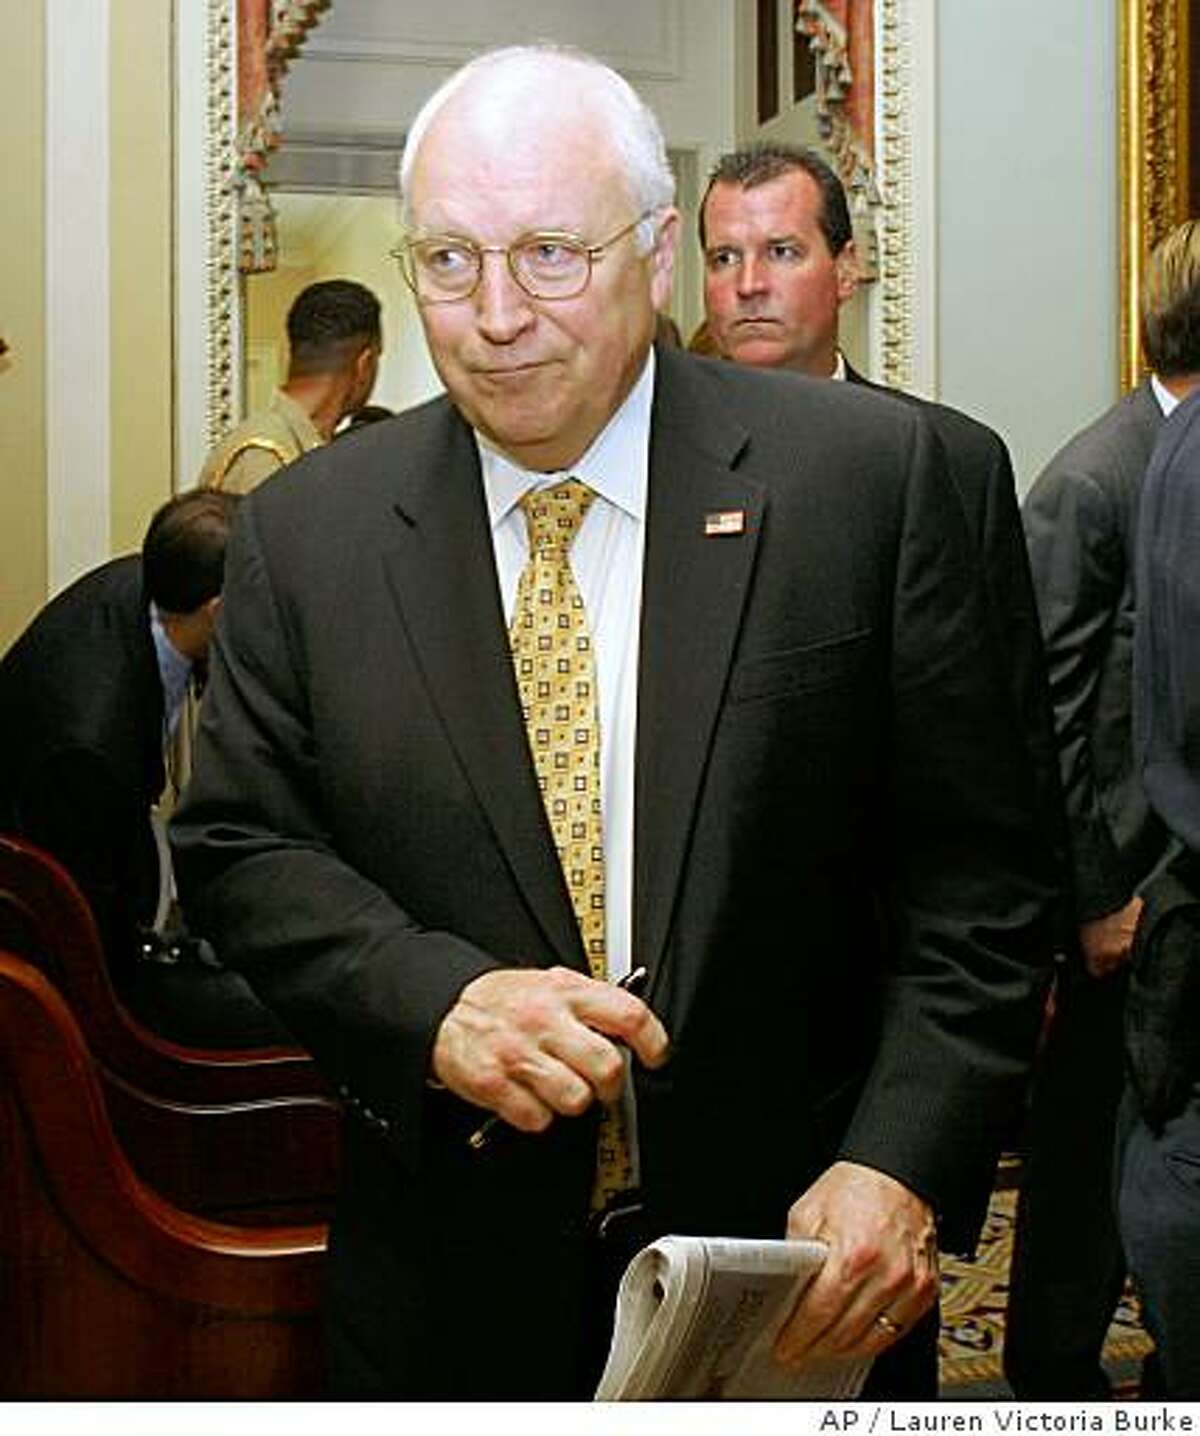 Vice President Dick Cheney leaves the weekly Republican luncheon on Capitol Hill in Washington, Tuesday, June 5, 2007. Earlier, Cheney's former Chief of Staff I. Lewis "Scooter" Libby was sentenced to 2 1/2 years in prison in the CIA leak investigation. (AP Photo/Lauren Victoria Burke)